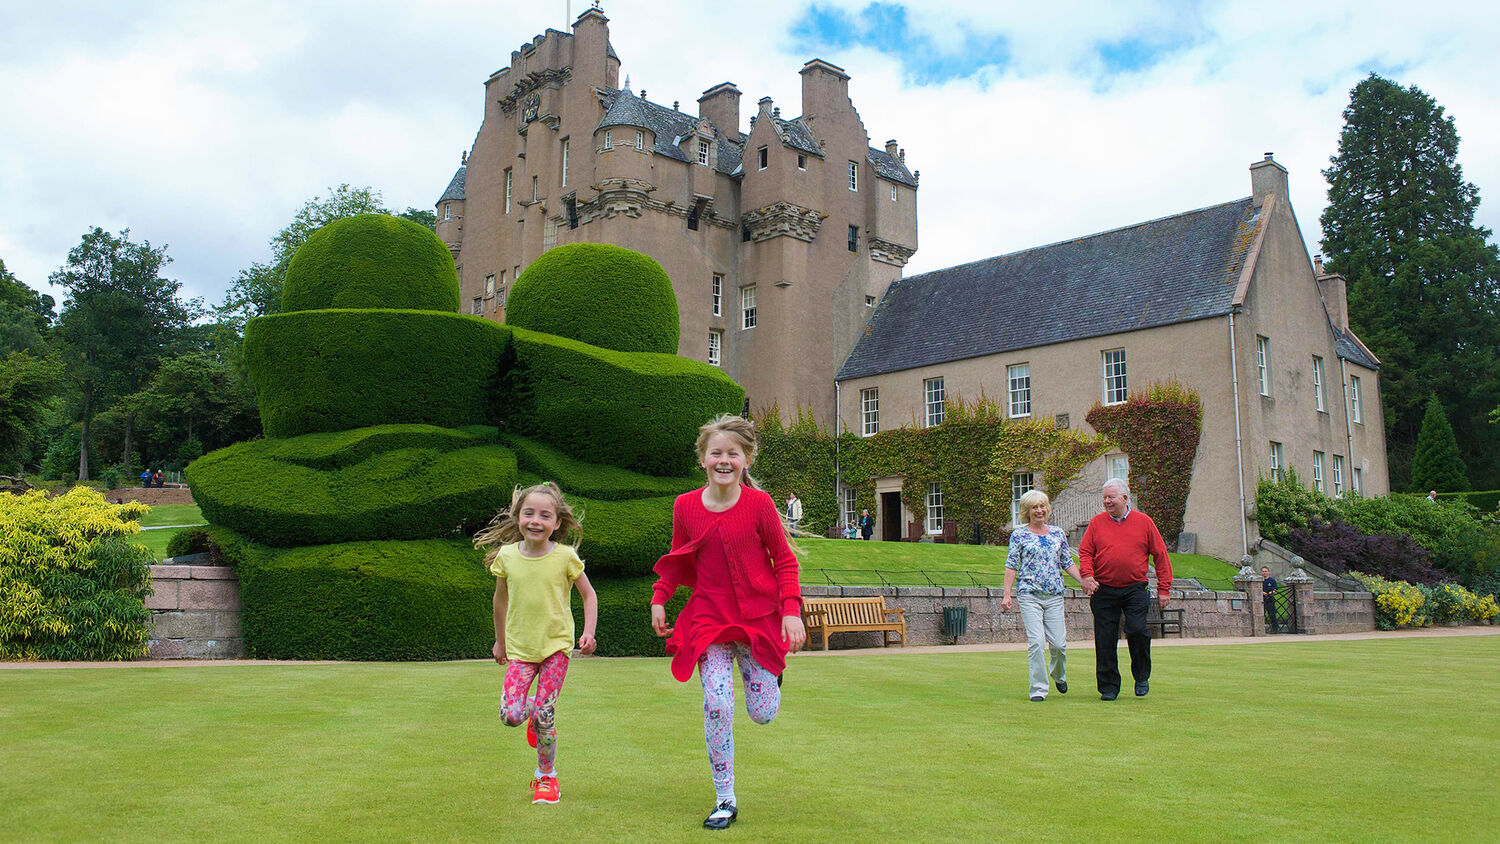 Tow children run towards the camera on the lawn in front of Crathes Castle. An older couple walk hand in hand behind them.